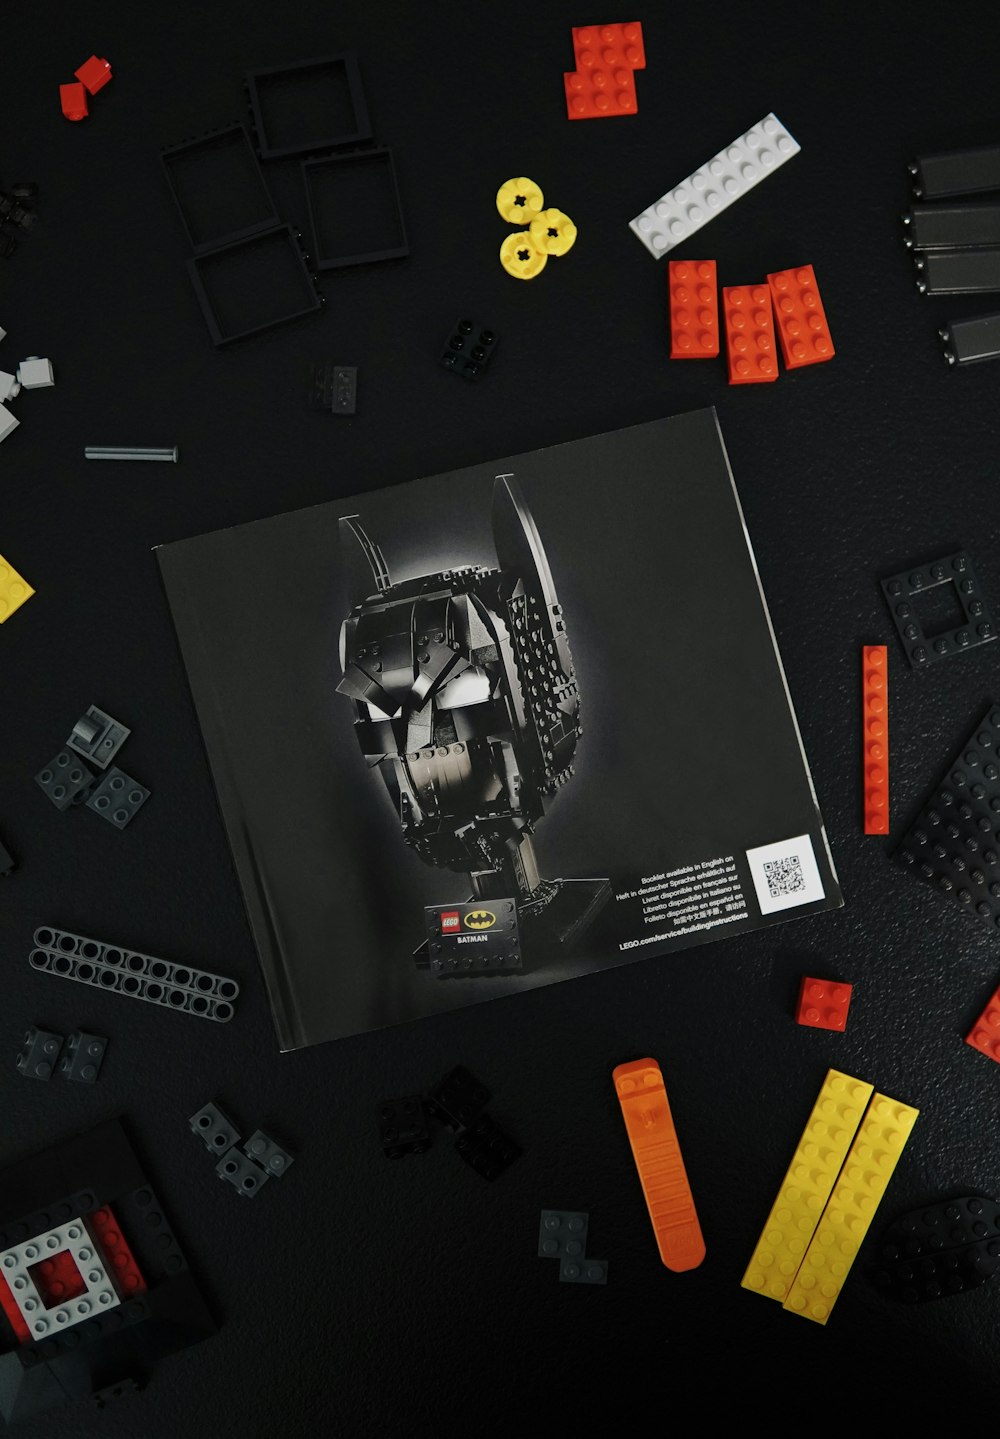 a lego batman movie poster surrounded by legos